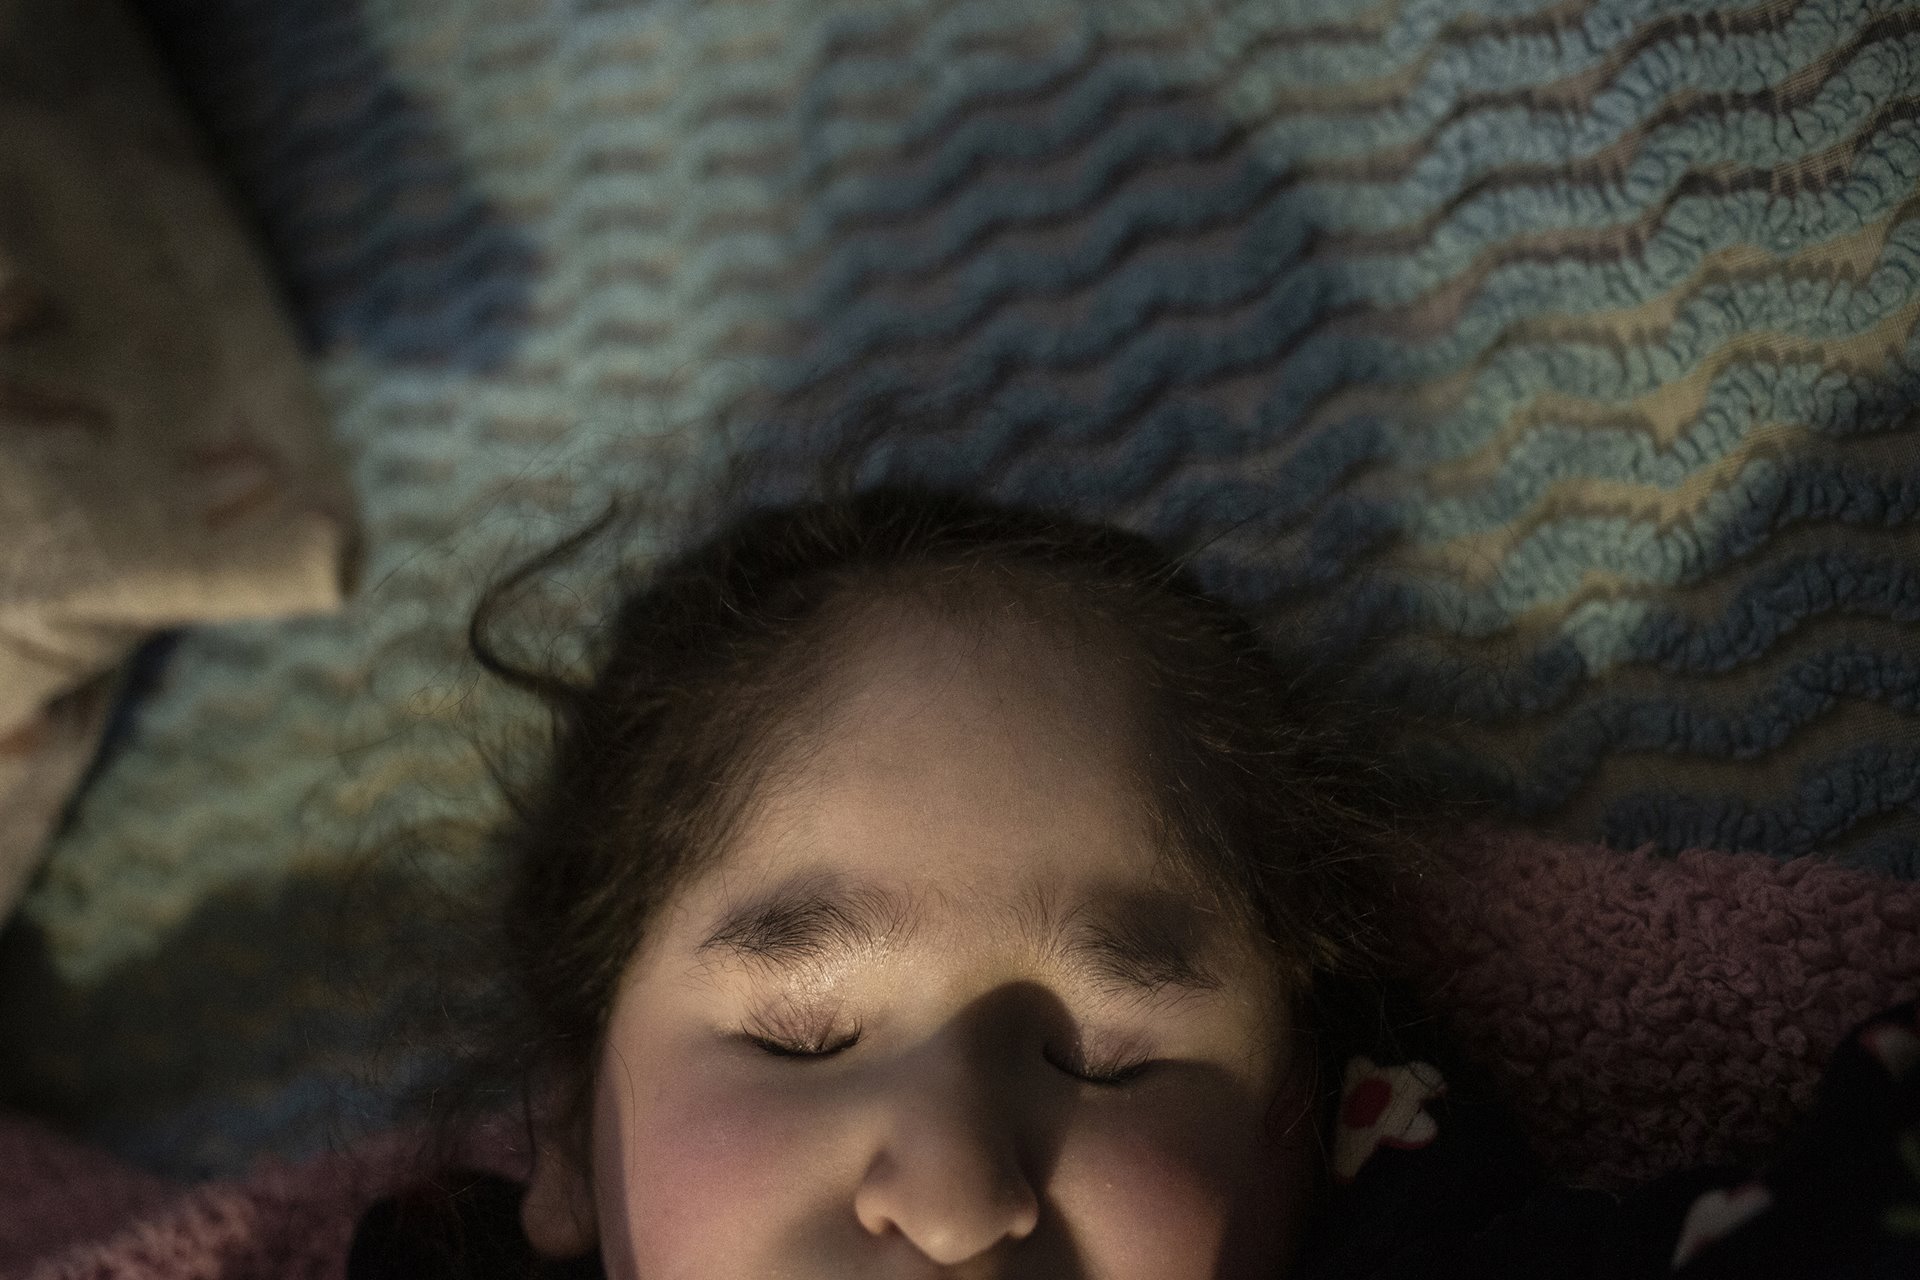 <p>Carmelita (16) lies on her bed, in Villa Guerrero, Mexico. Photosensitivity caused by encephalomalacia (softening of the brain tissue) gives Carmelita such pain that she cannot go out into the light.</p>
